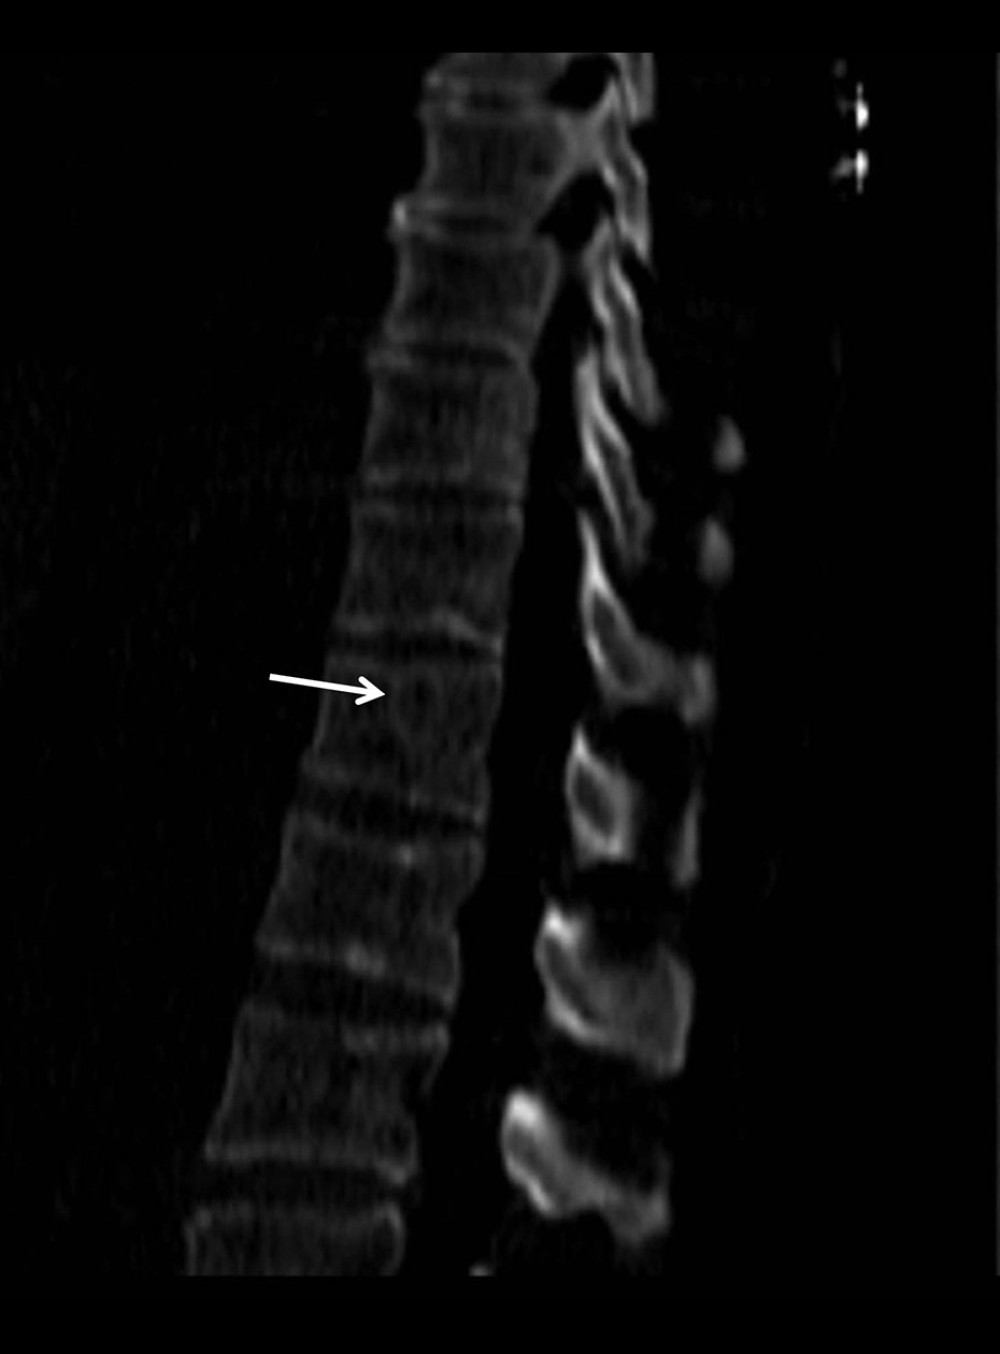 Computed tomography (CT) scan of the spine shows the osteolytic lesion (arrow) of T12.